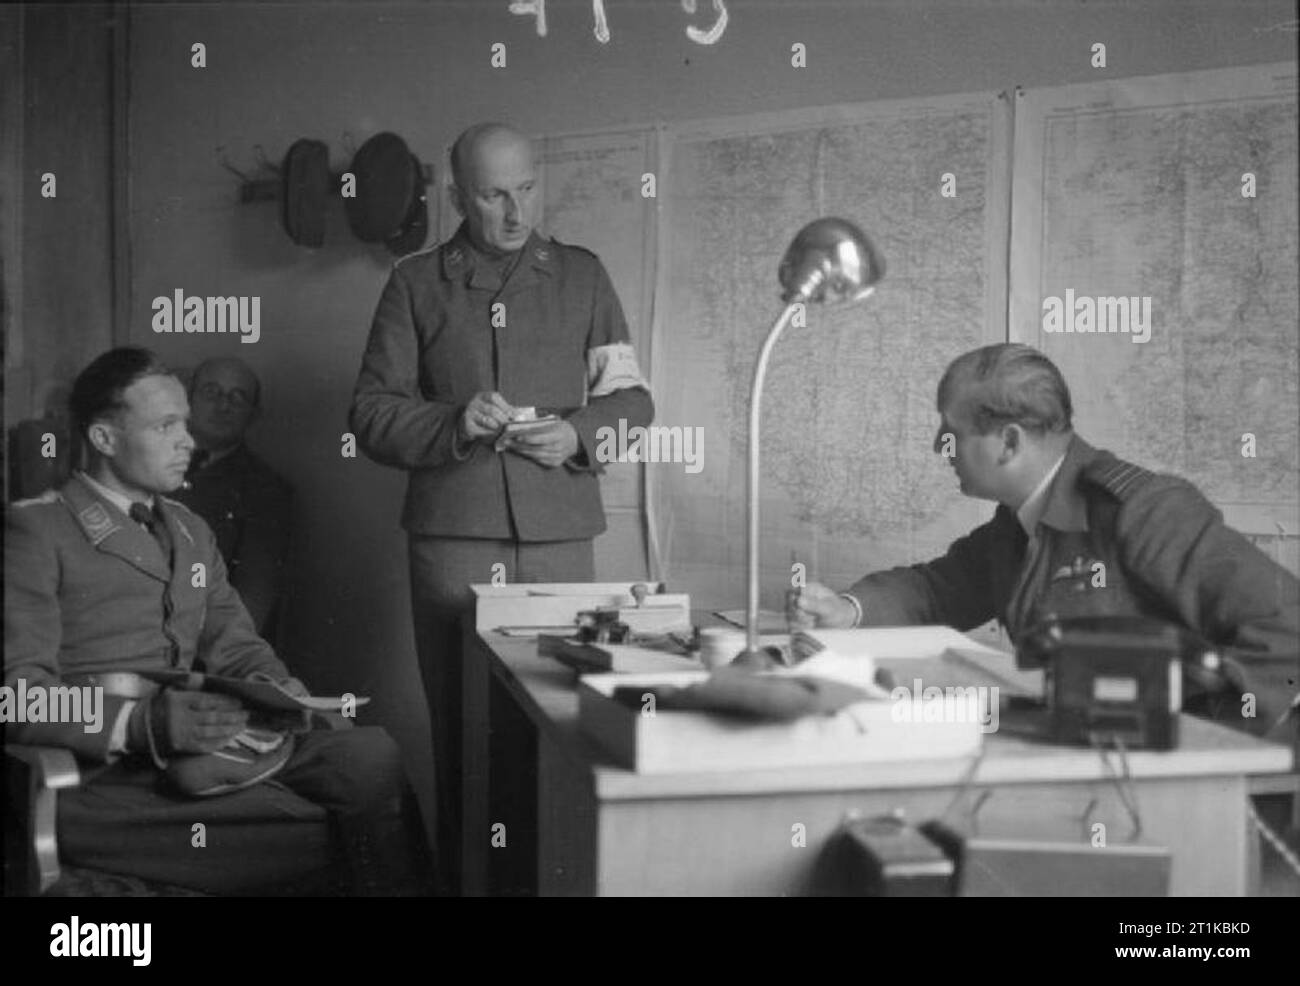 Royal Air Force- British Air Forces of Occupation, 1945. Wing Commander W W Russell (right), Commanding Officer of an RAF Disarmament Wing at Stavanger, Norway, conducts a morning conference with the Luftwaffe officer (left) in charge of prisoners who are disarming German aircraft at Sola airfield. A German interpreter stands in the middle taking notes and instructions. Stock Photo